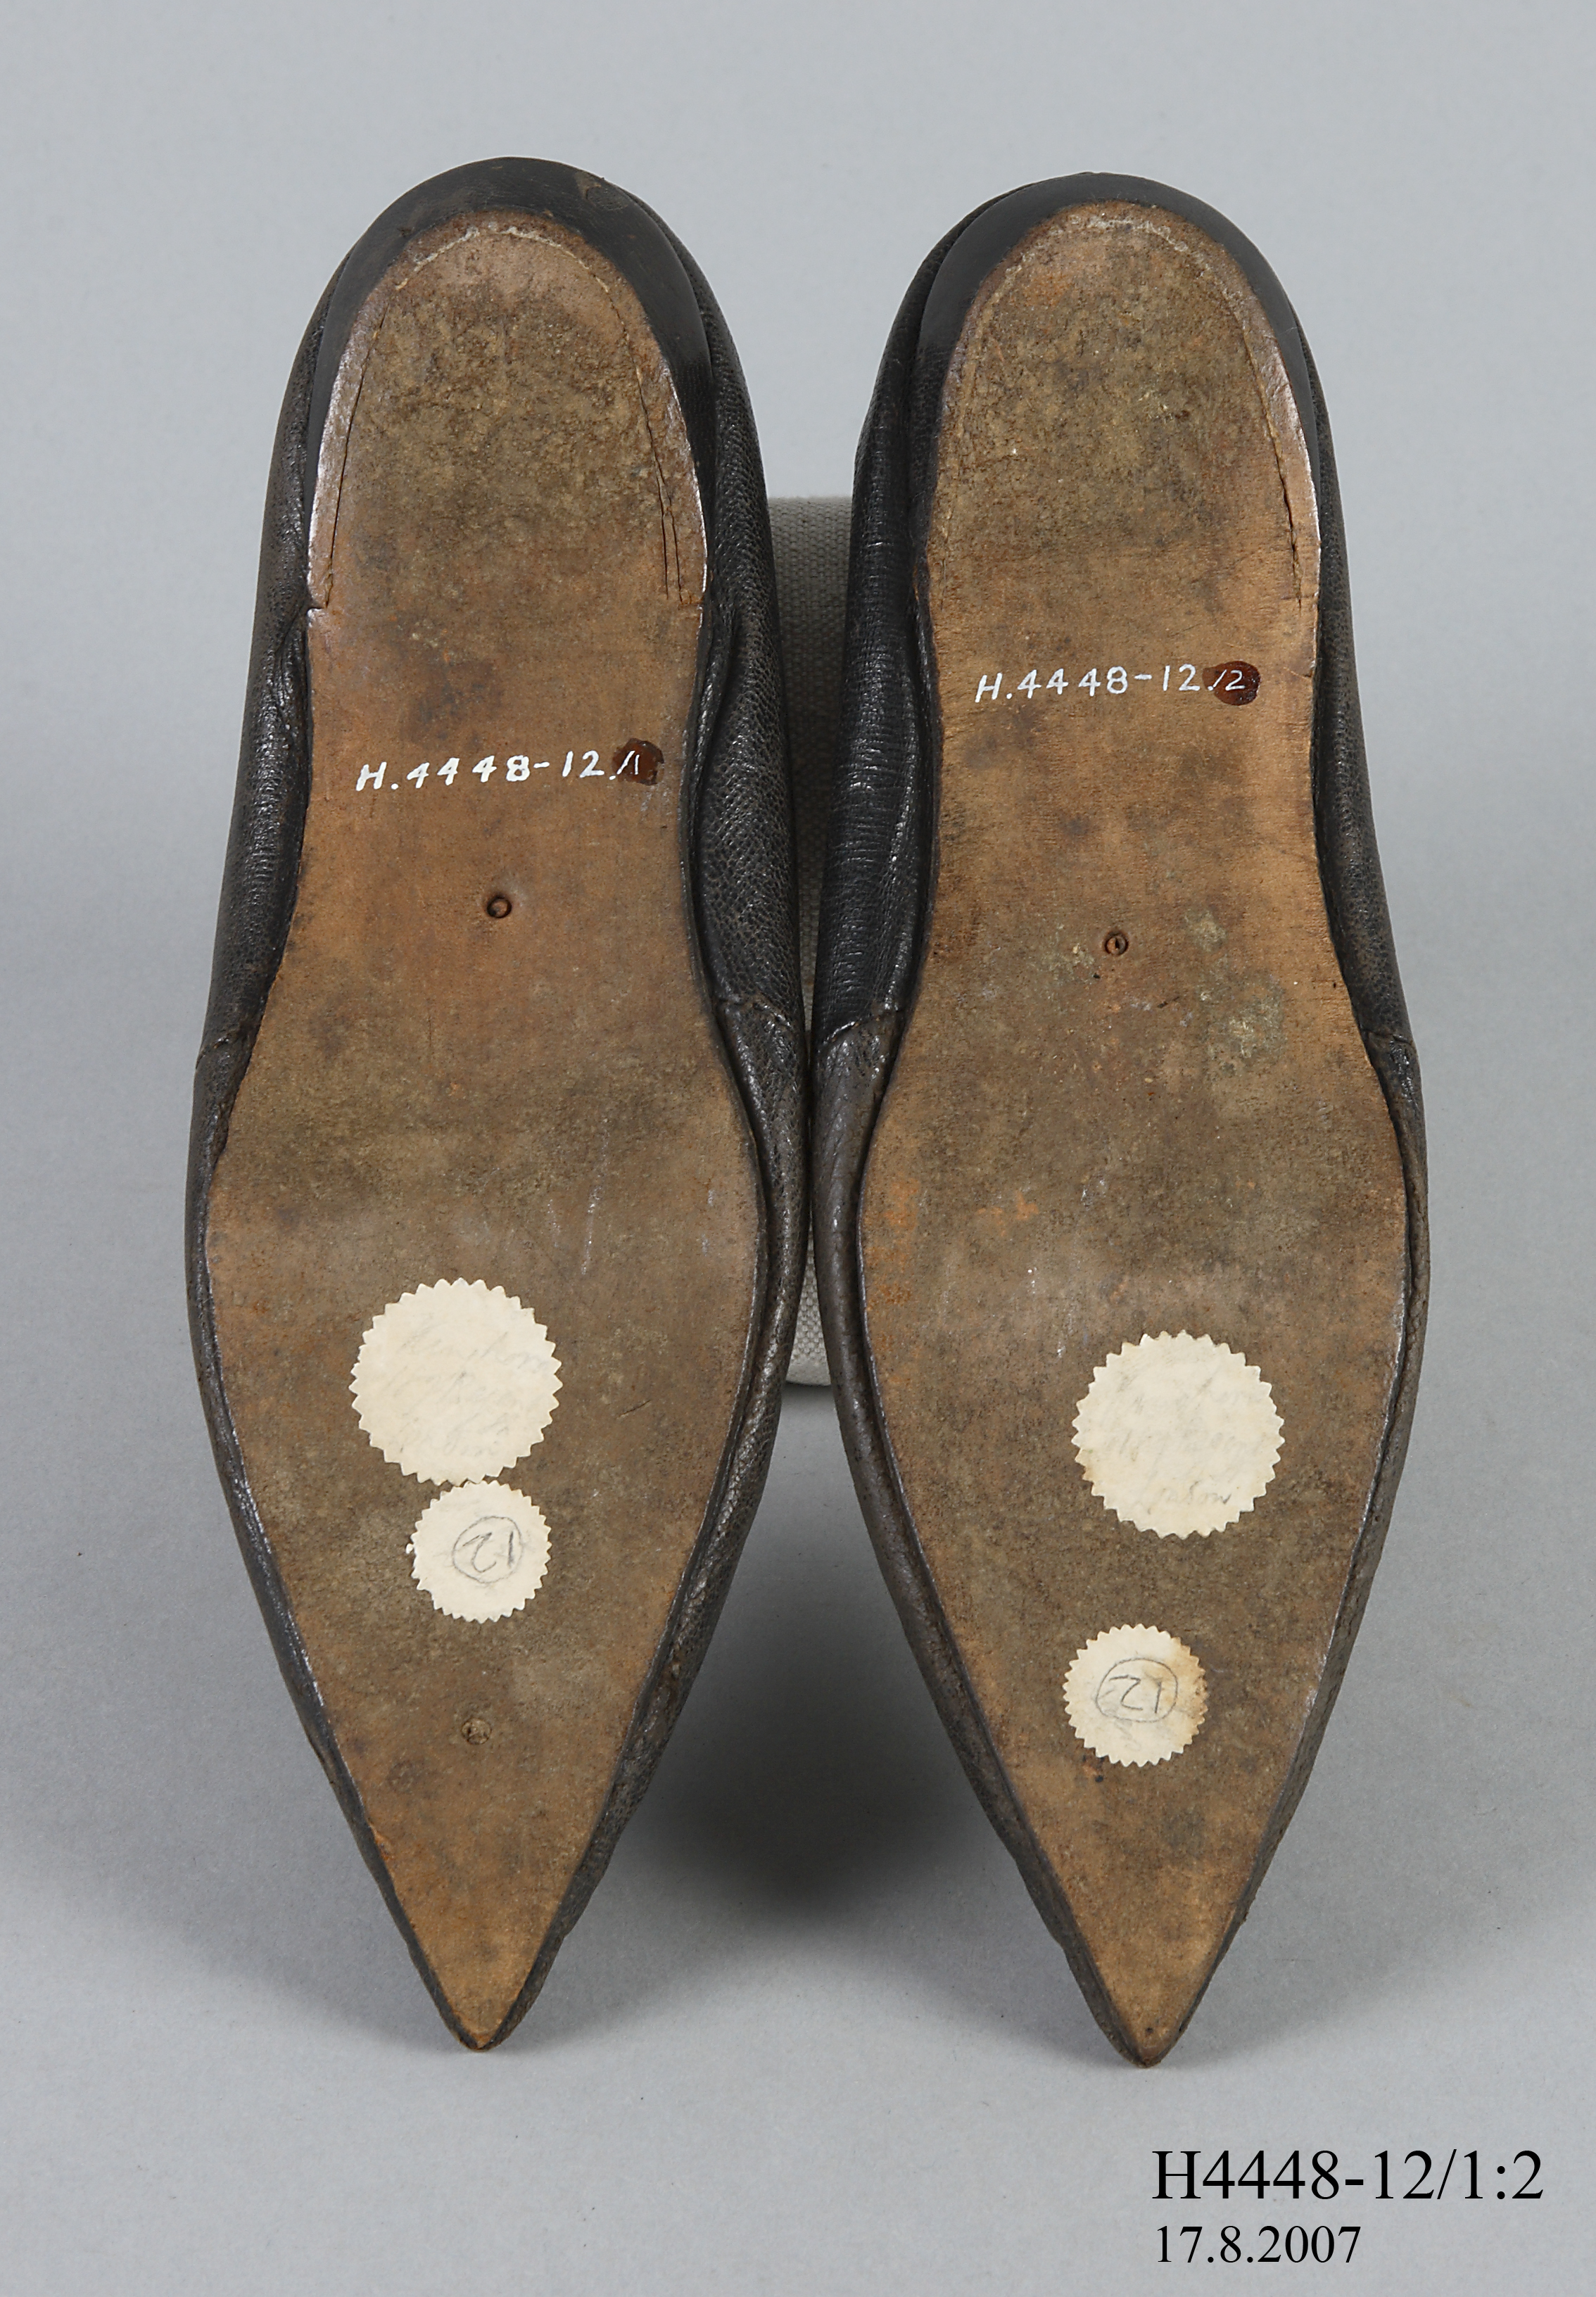 Pair of slip on shoes from the Joseph Box collection